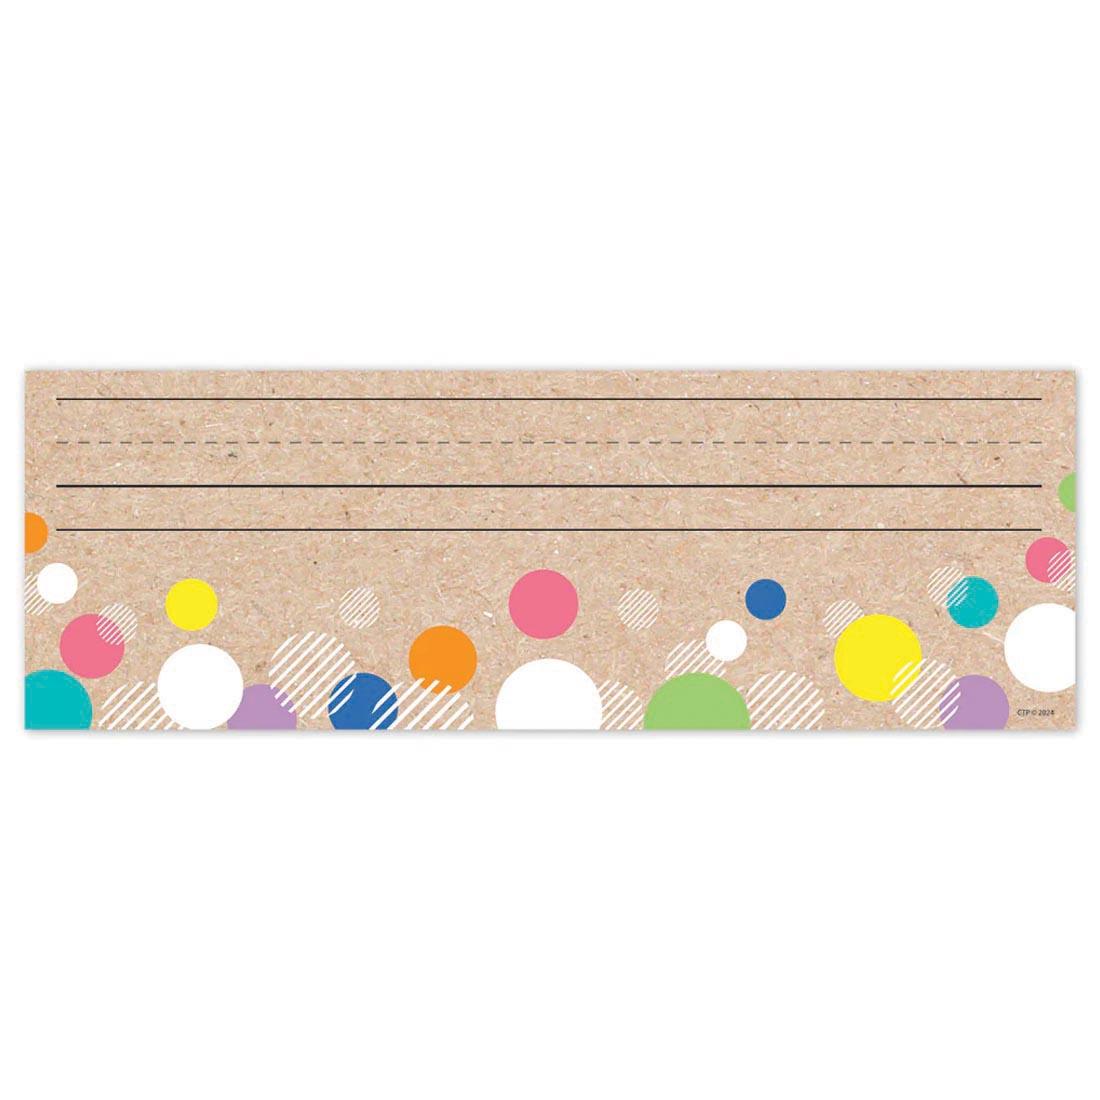 Colorful Kraft Bubbles Name Plate from the Krafty Pop collection by Creative Teaching Press